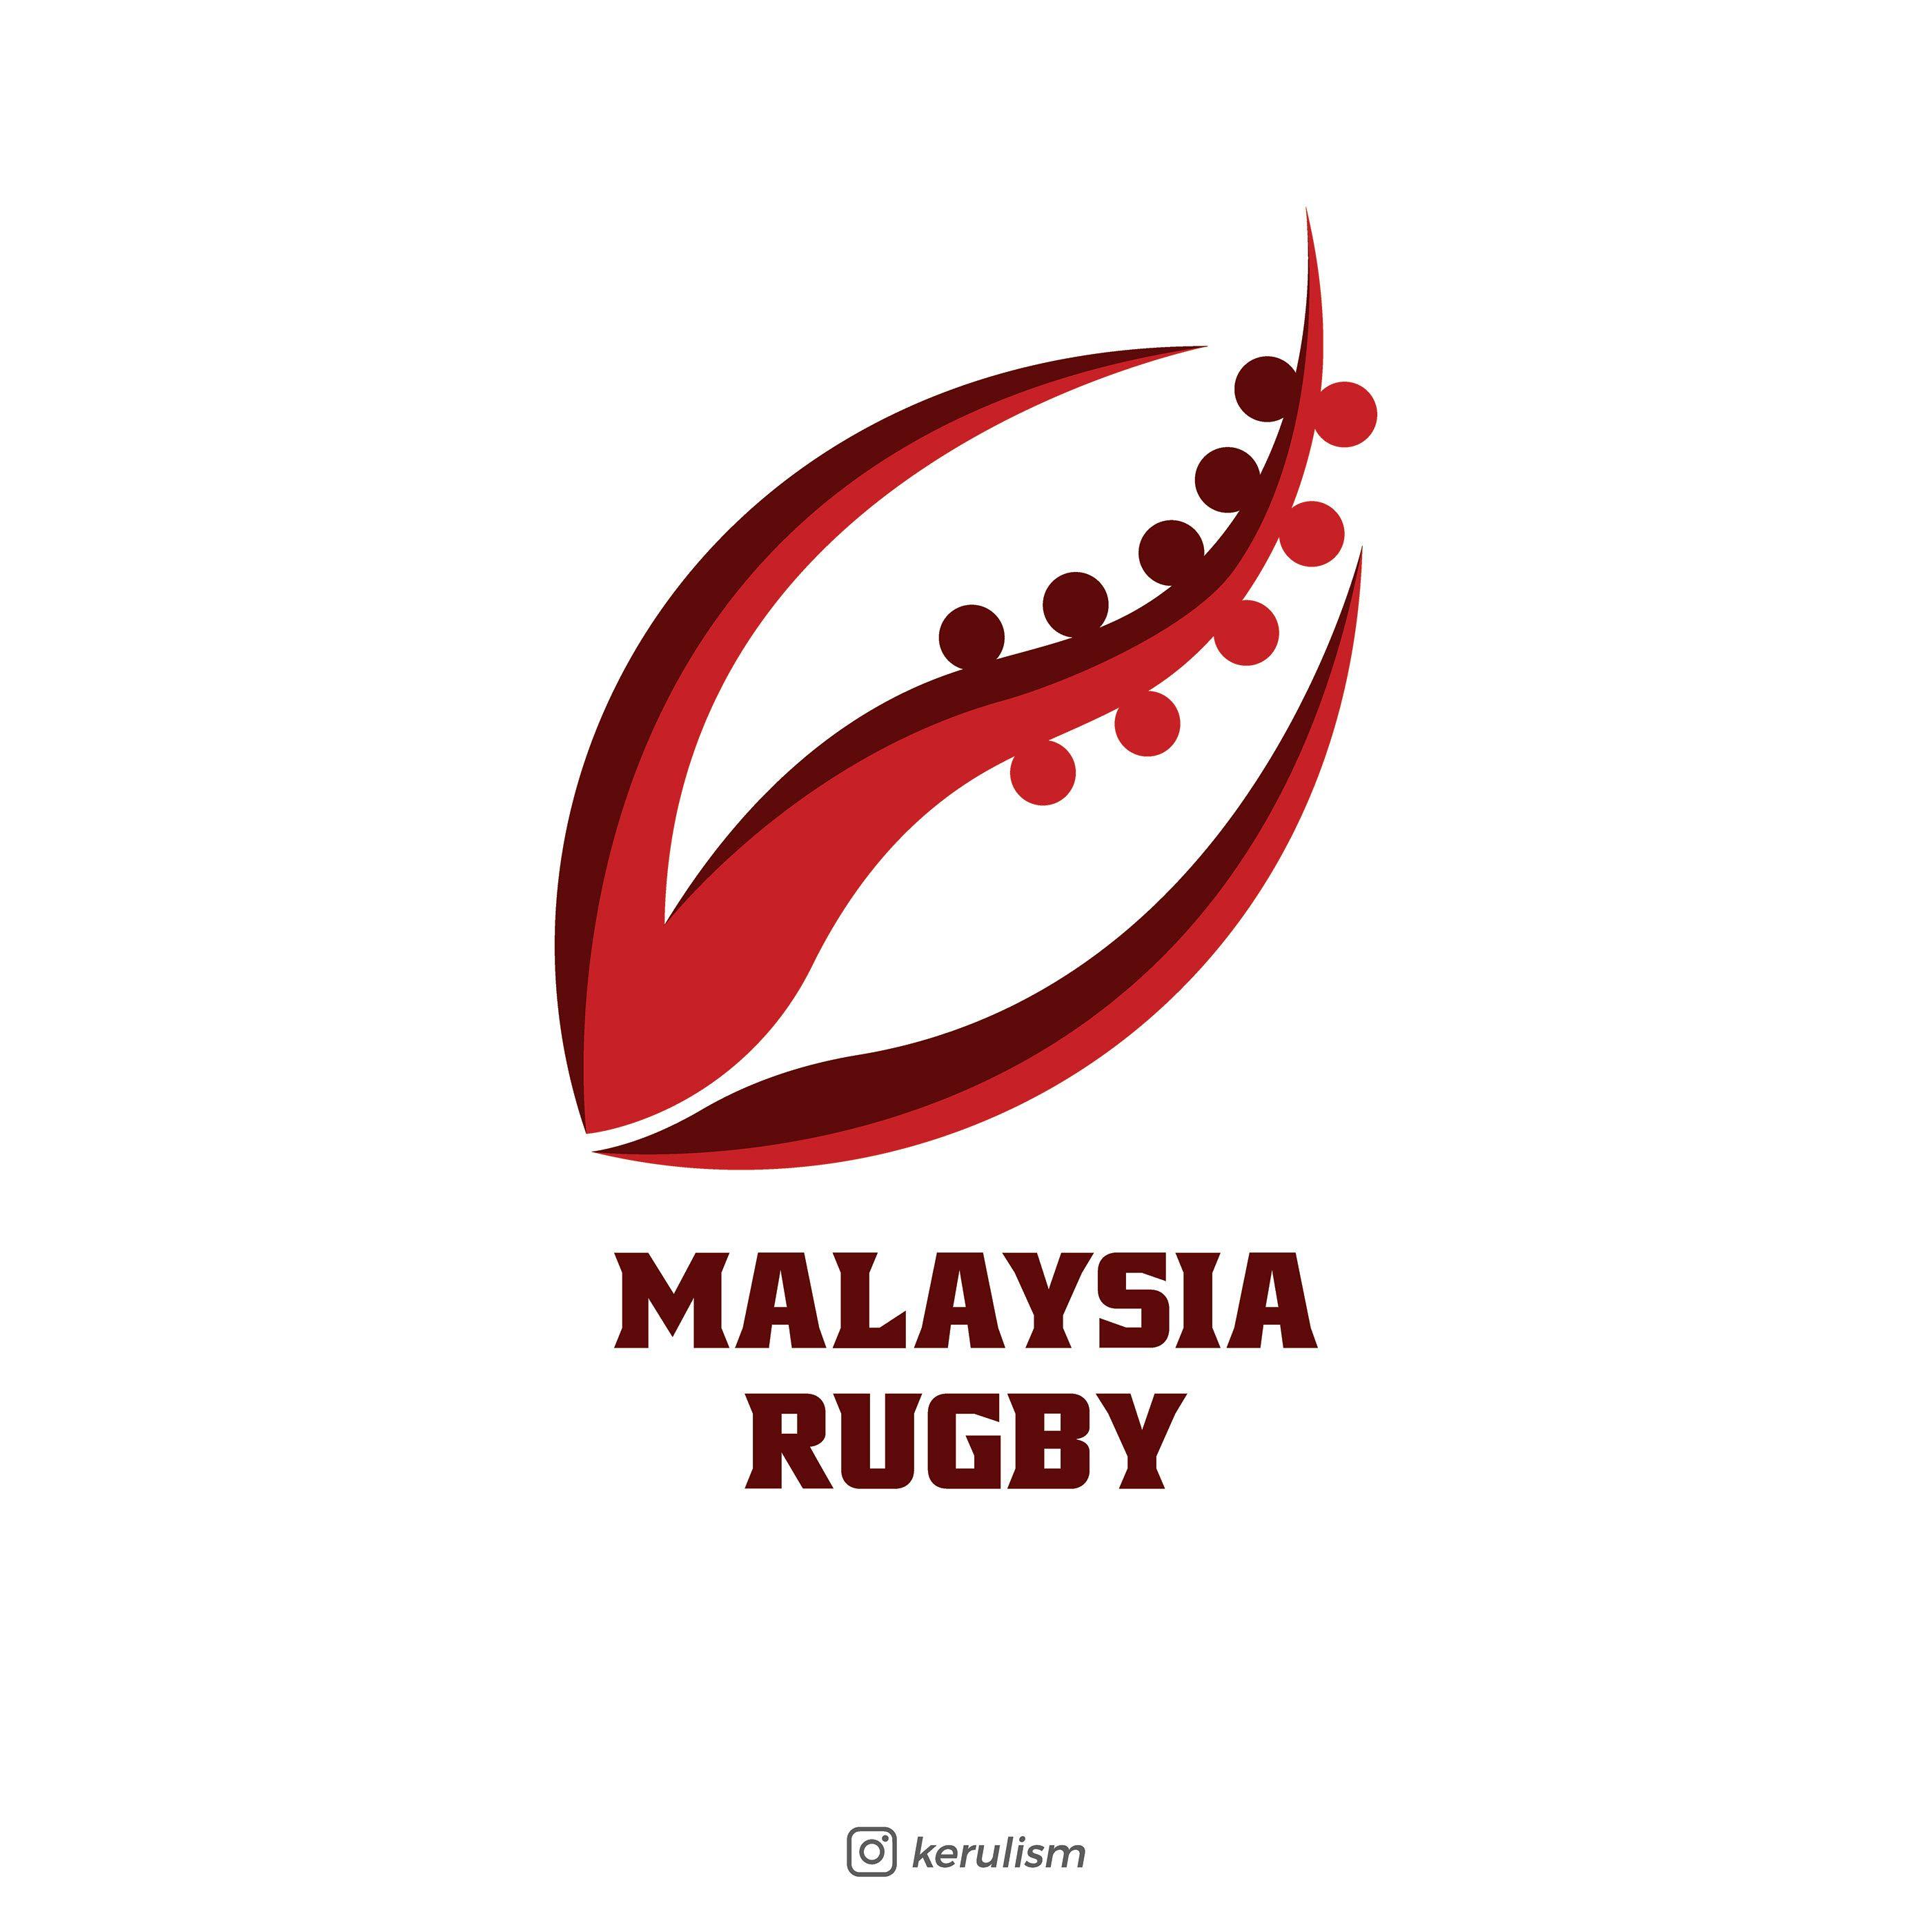 Rugby Logo - Malaysia Rugby Logo Revamped